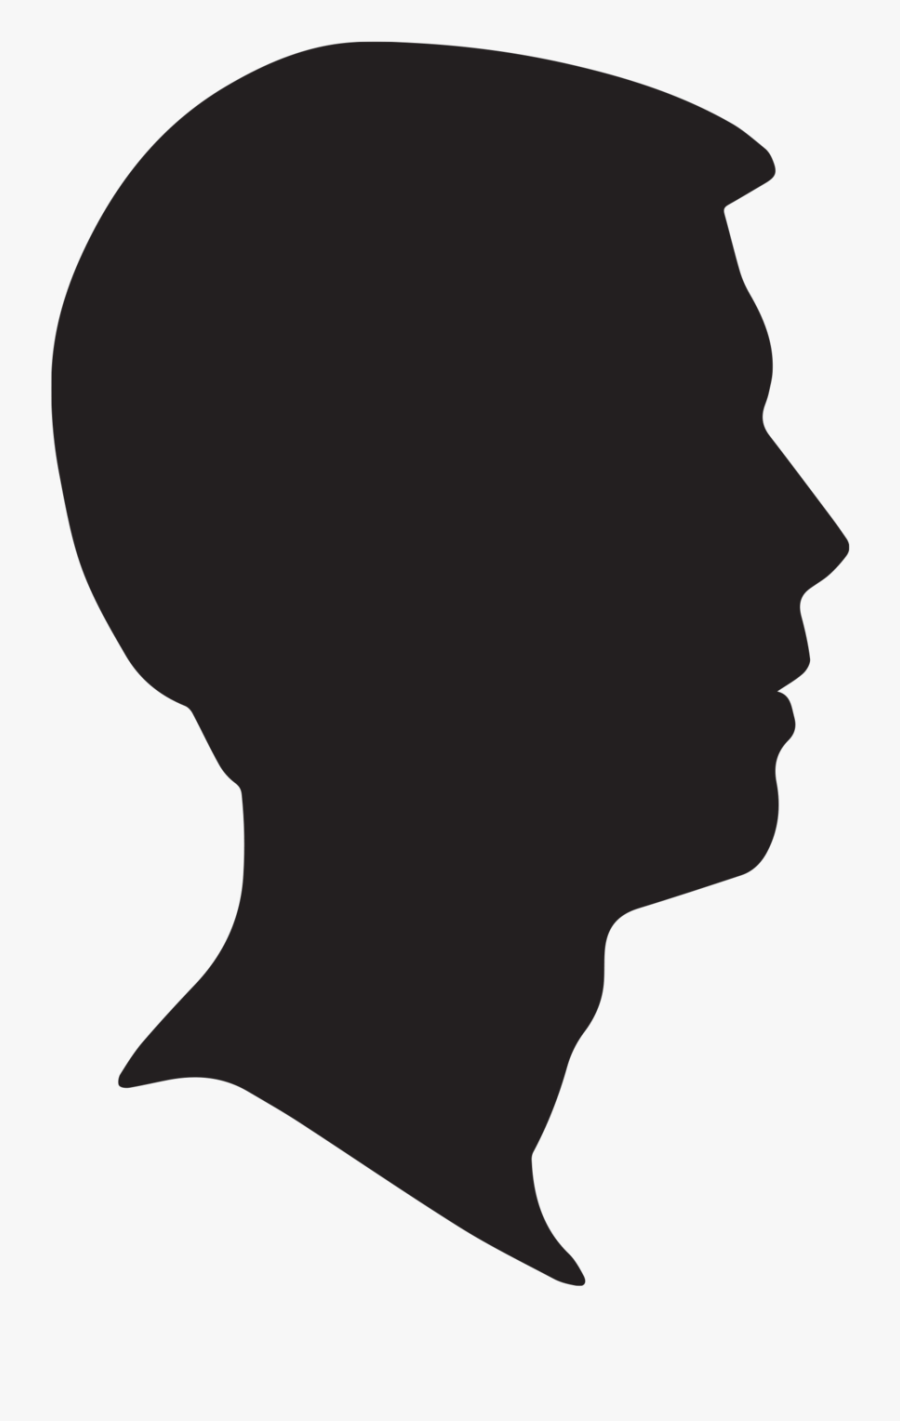 Liberty Bell Silhouette At Getdrawings - Male Head Silhouette, Transparent Clipart